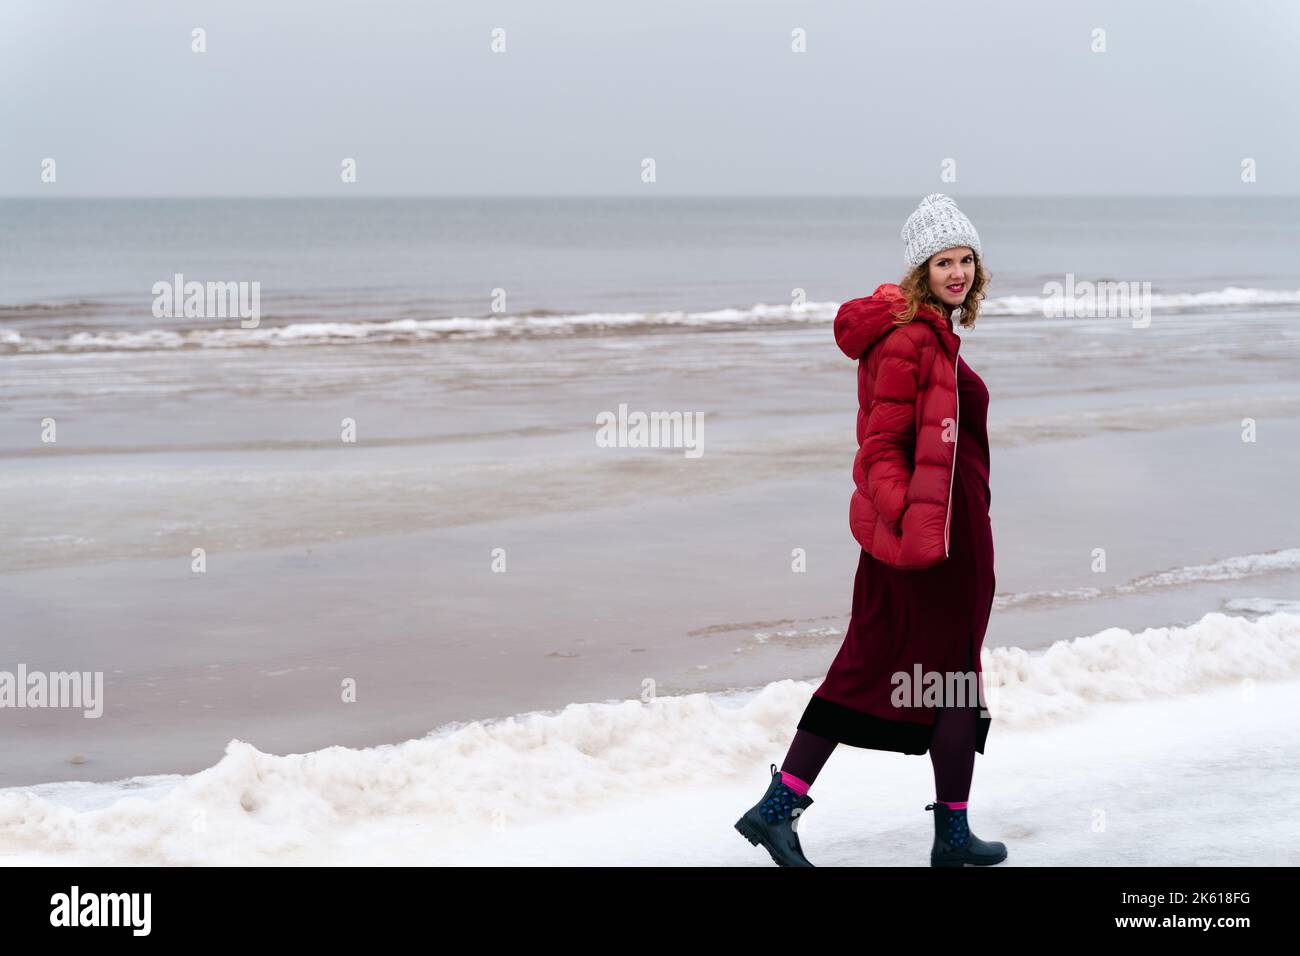 A woman in a red jacket and a red knitted dress walks in winter along the Baltic sea. Jurmala, Latvia Stock Photo